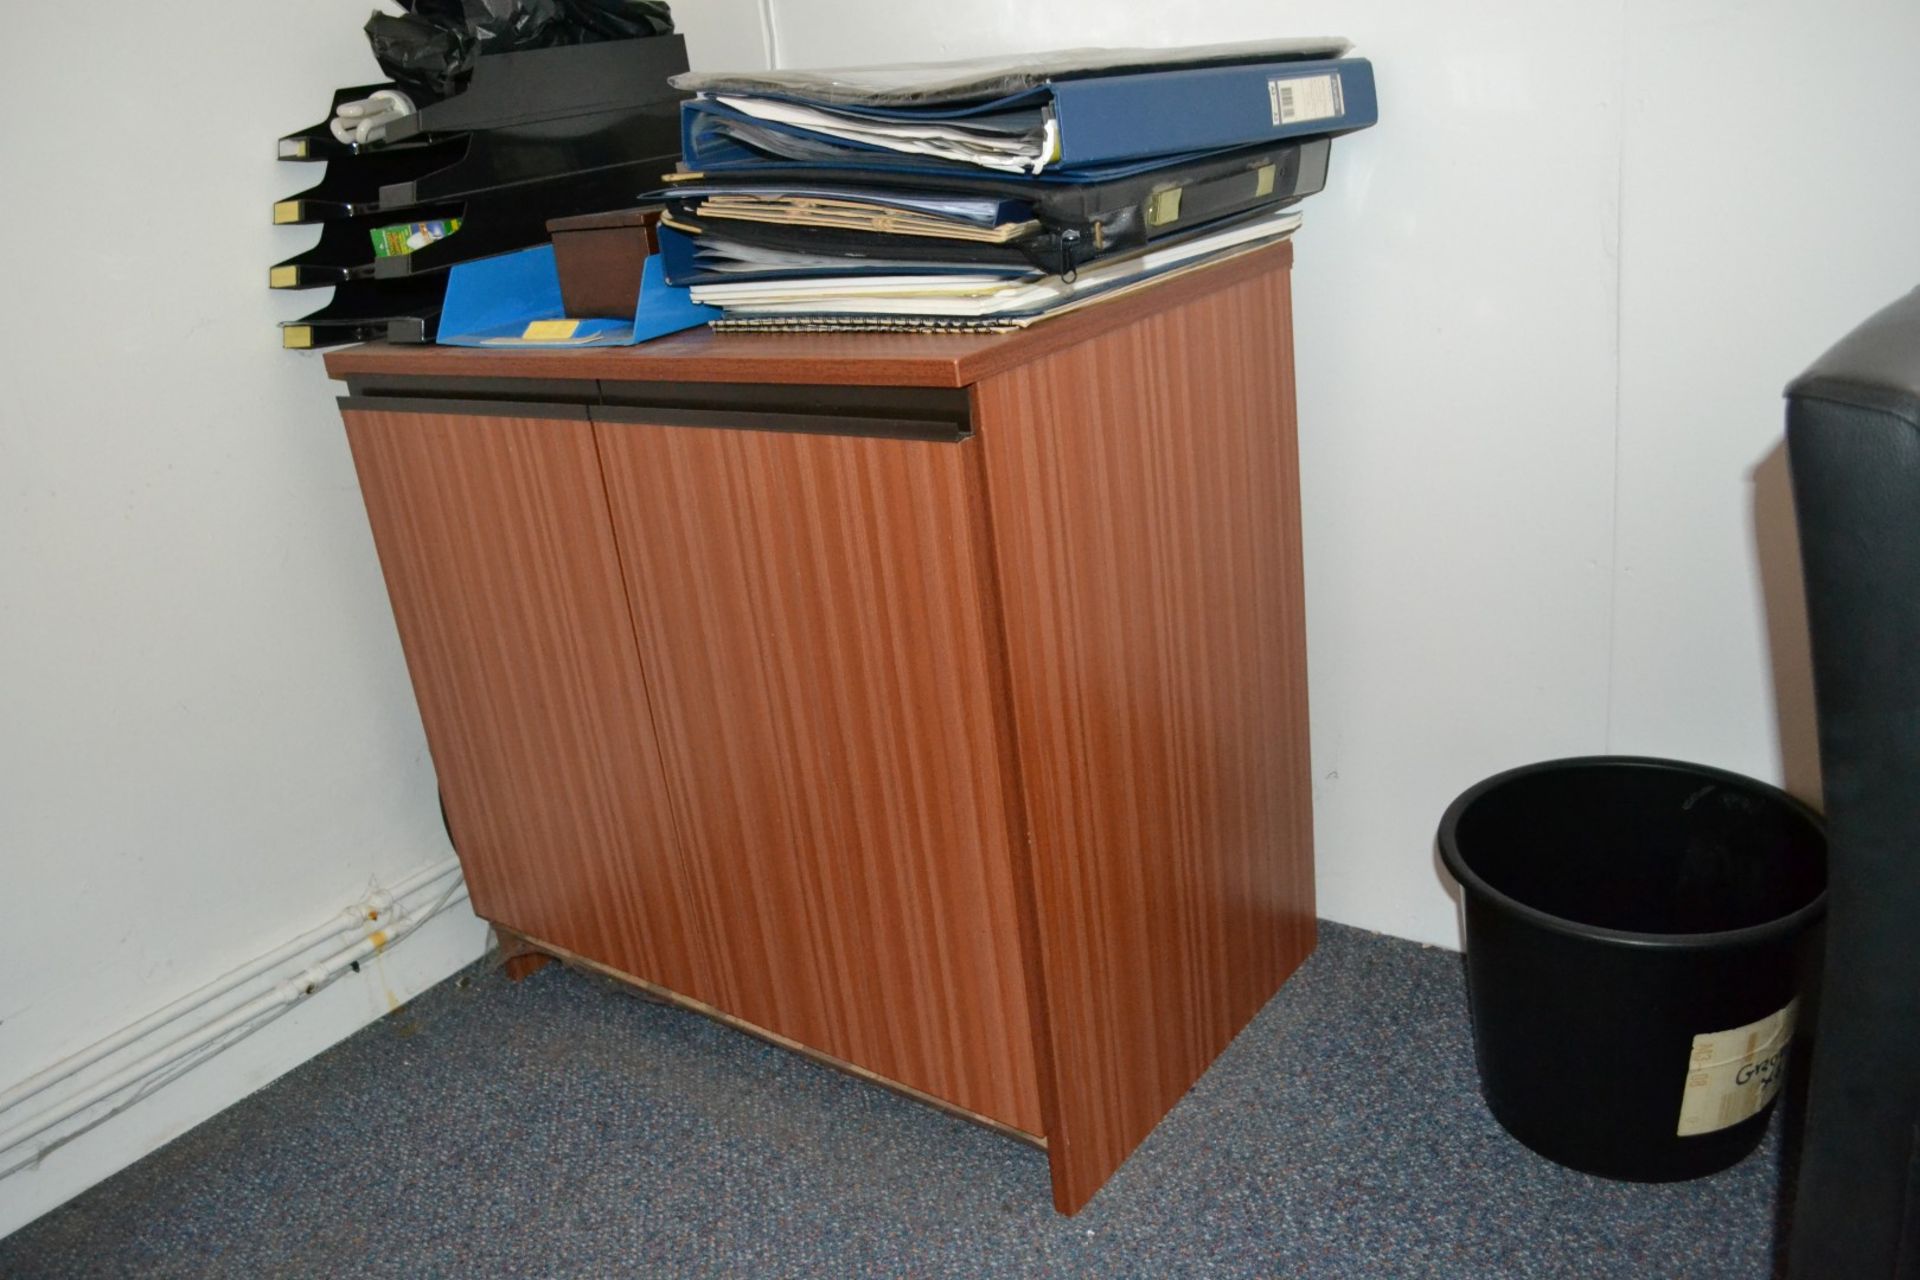 1 x Assorted Collection of Office Furniture Including Office Desk, Cabinet and Filing Cabinet - - Image 4 of 4